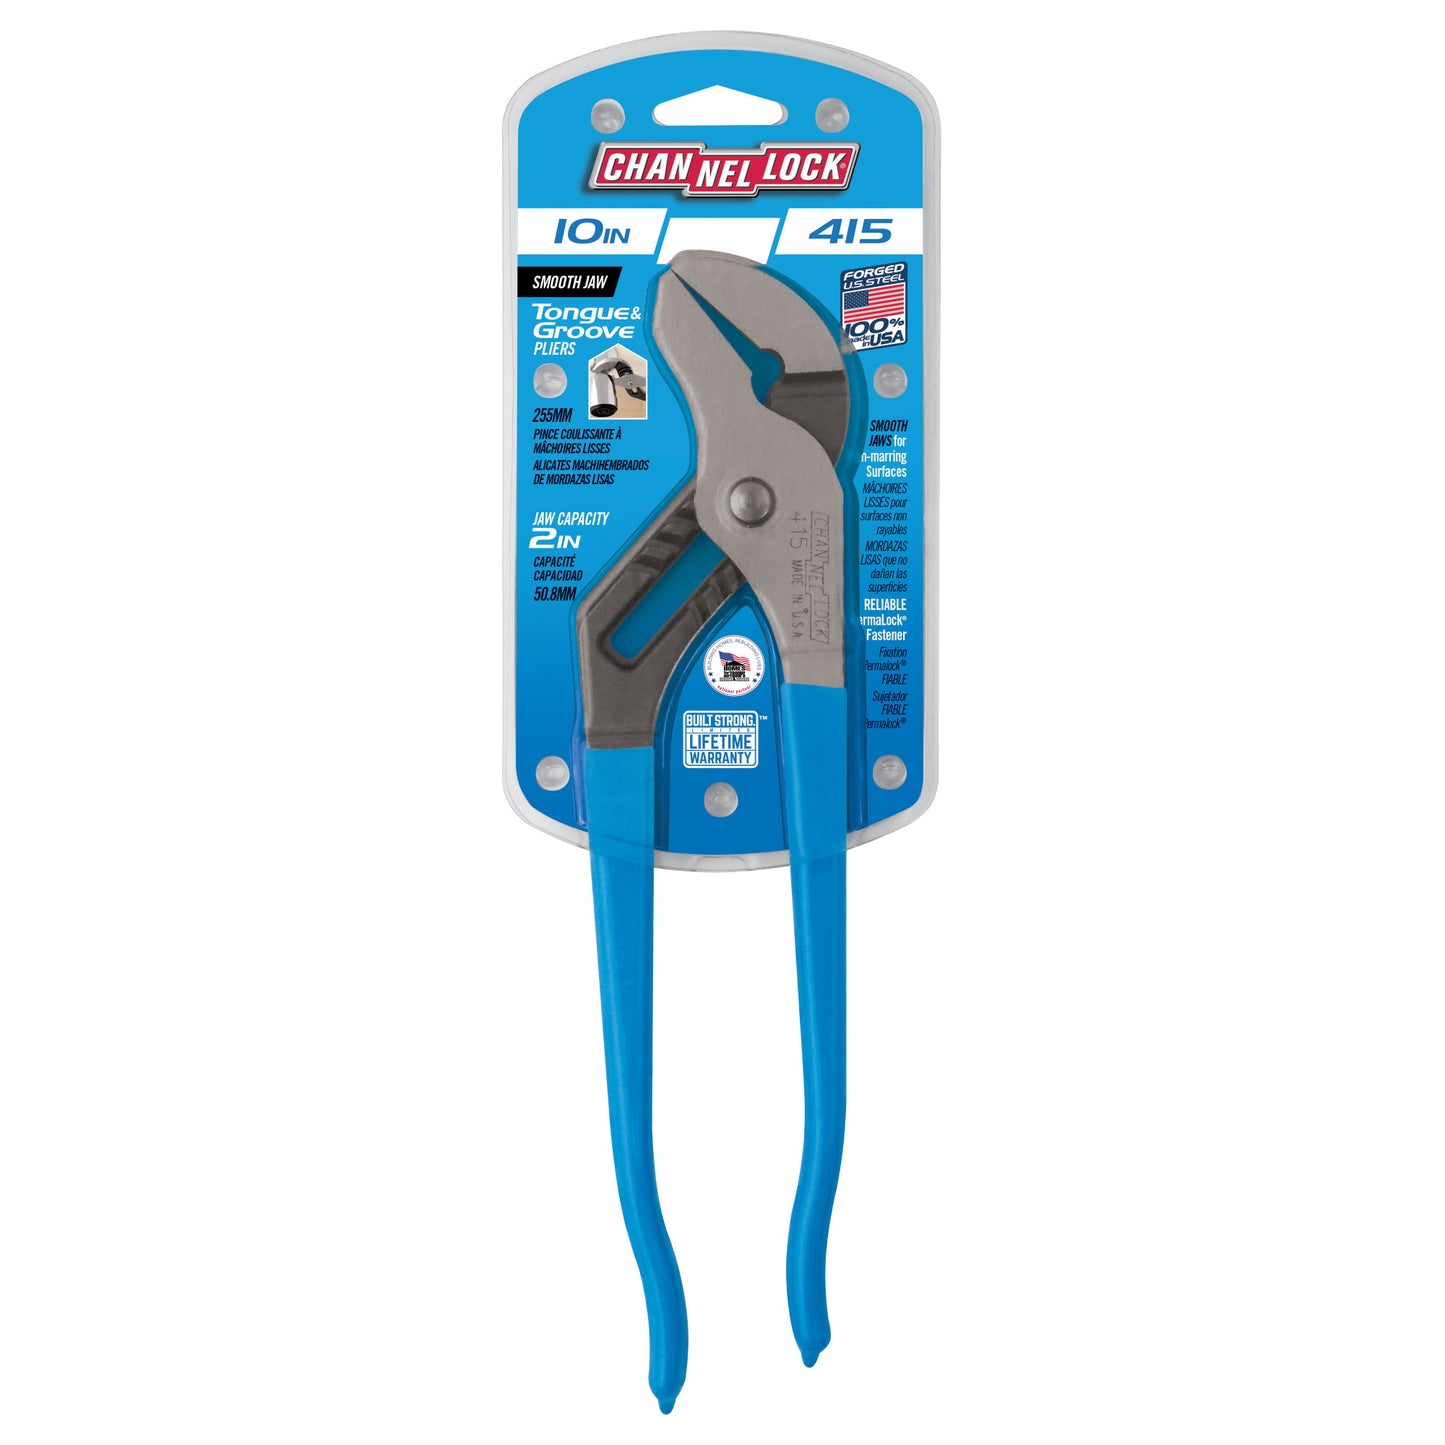 10-inch Smooth Jaw Tongue & Groove Pliers (415)